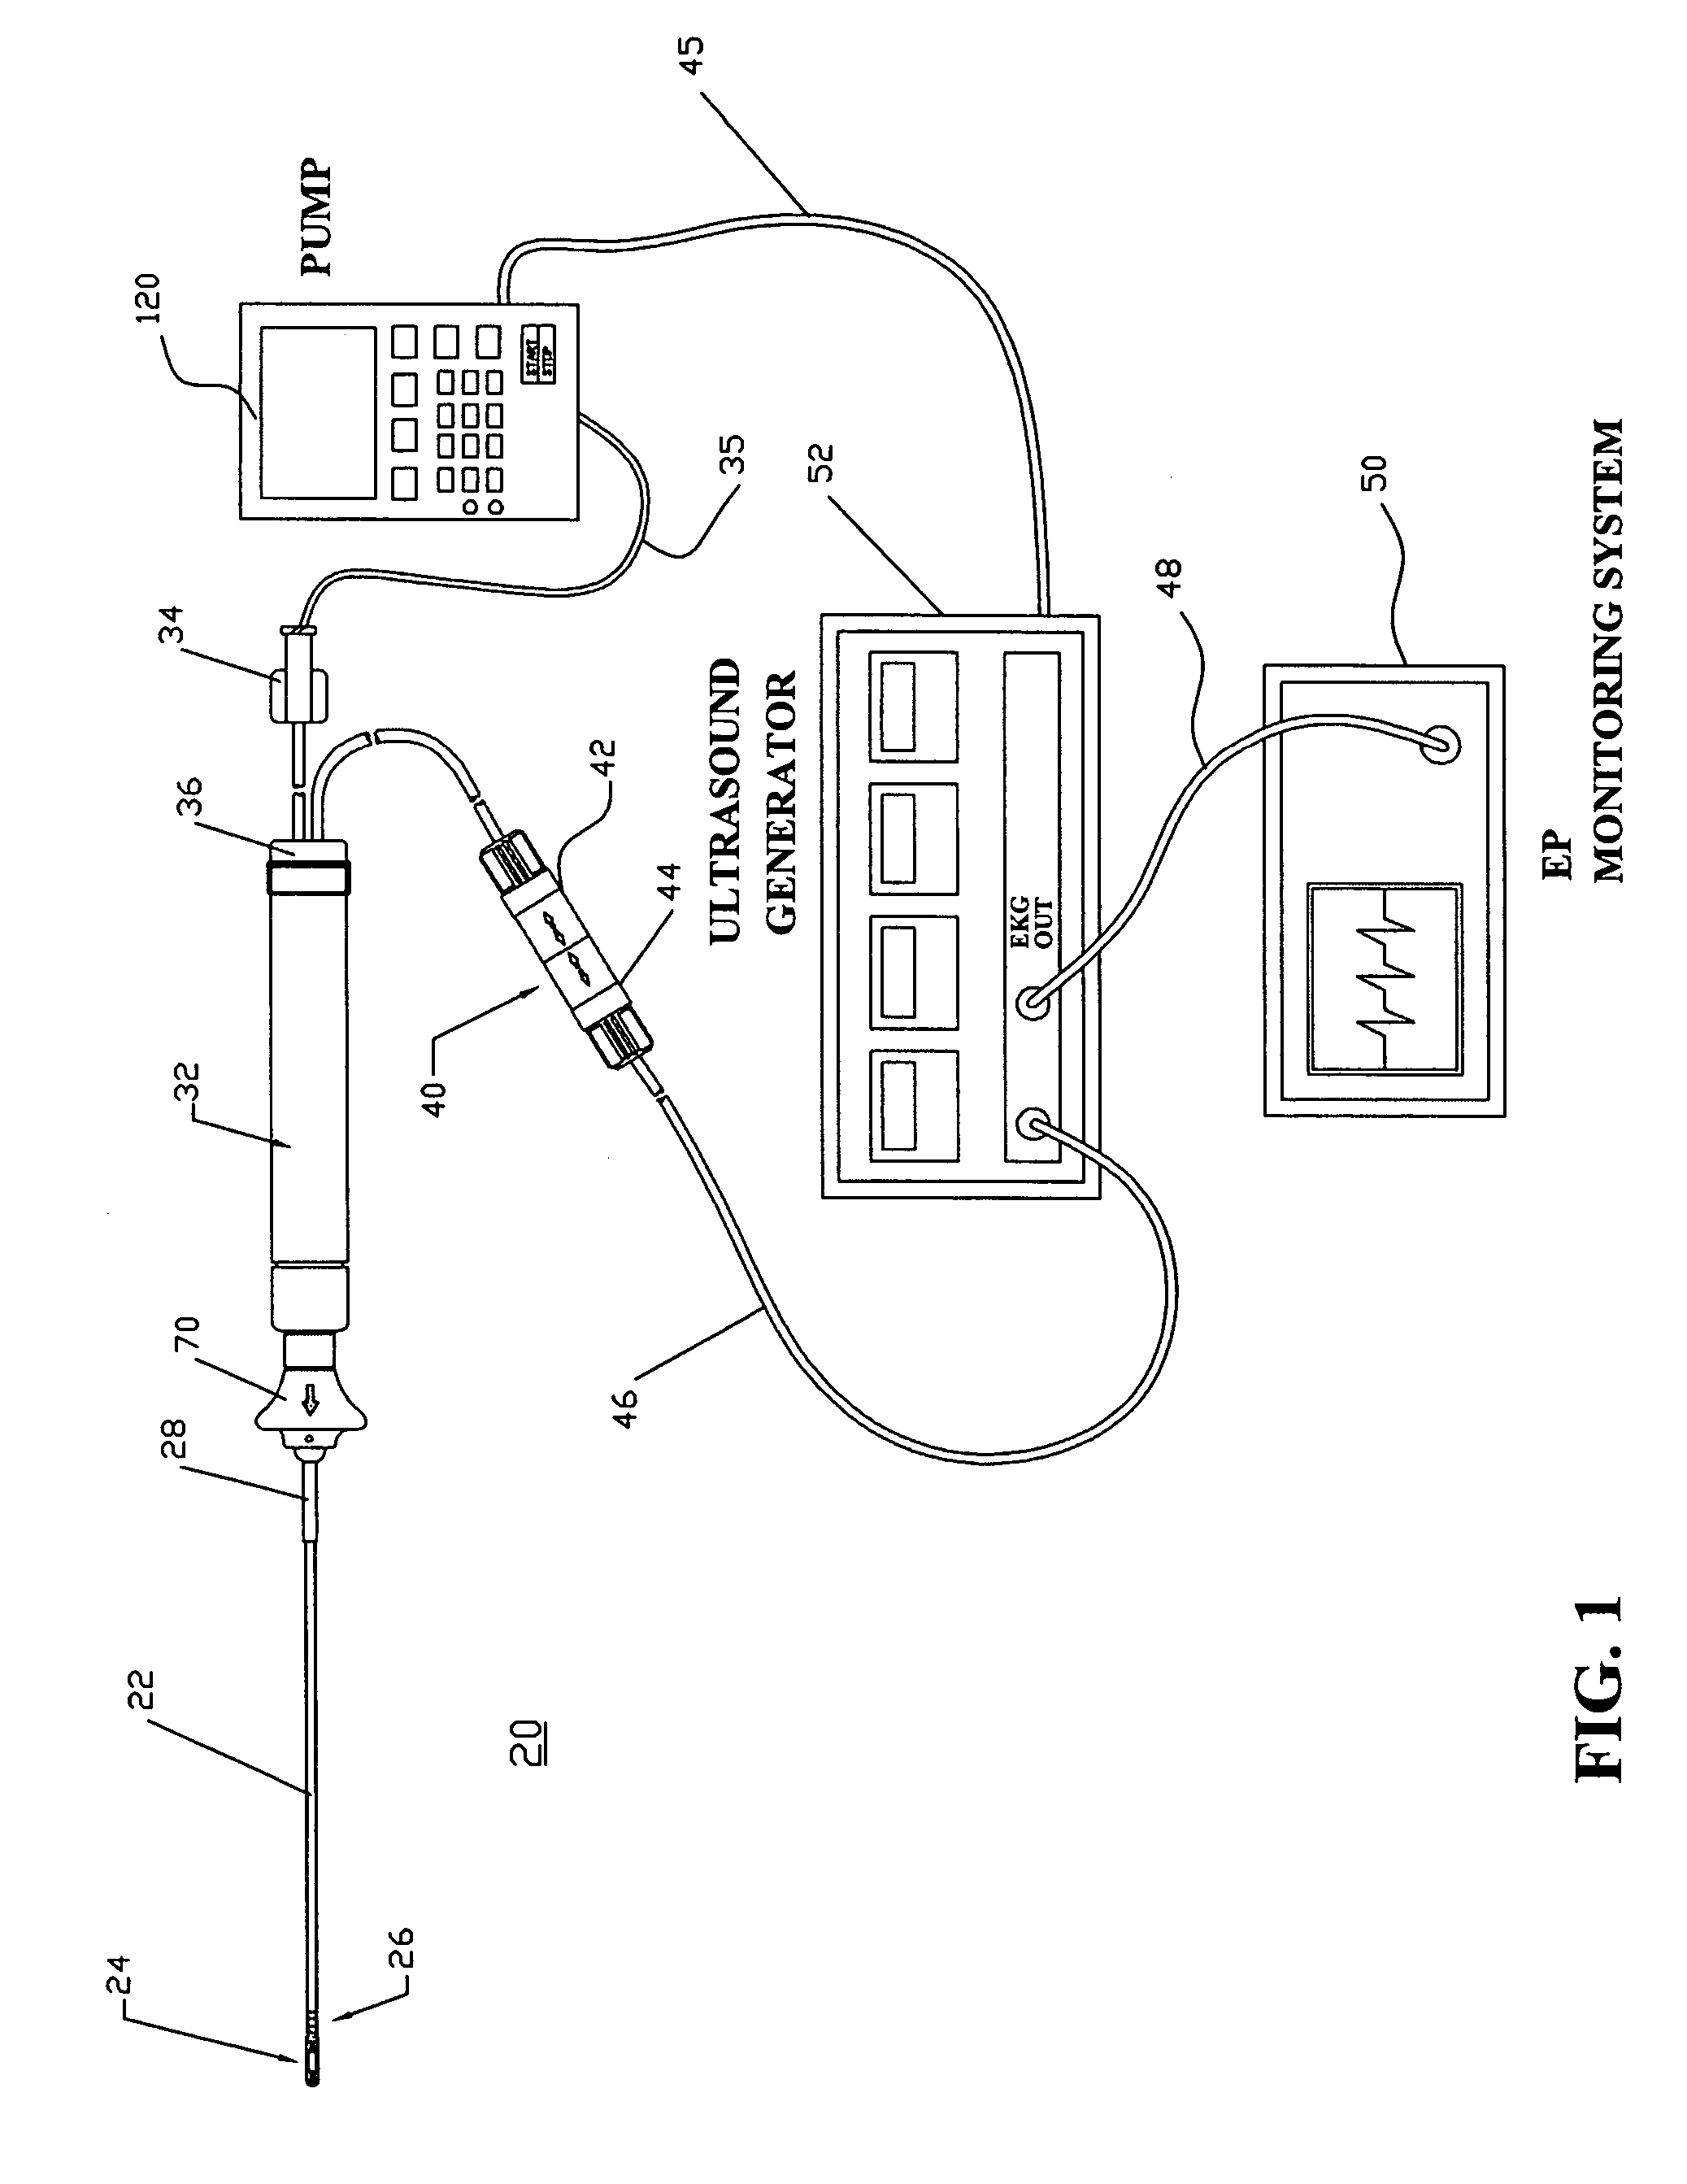 Non-contact tissue ablation device and methods thereof